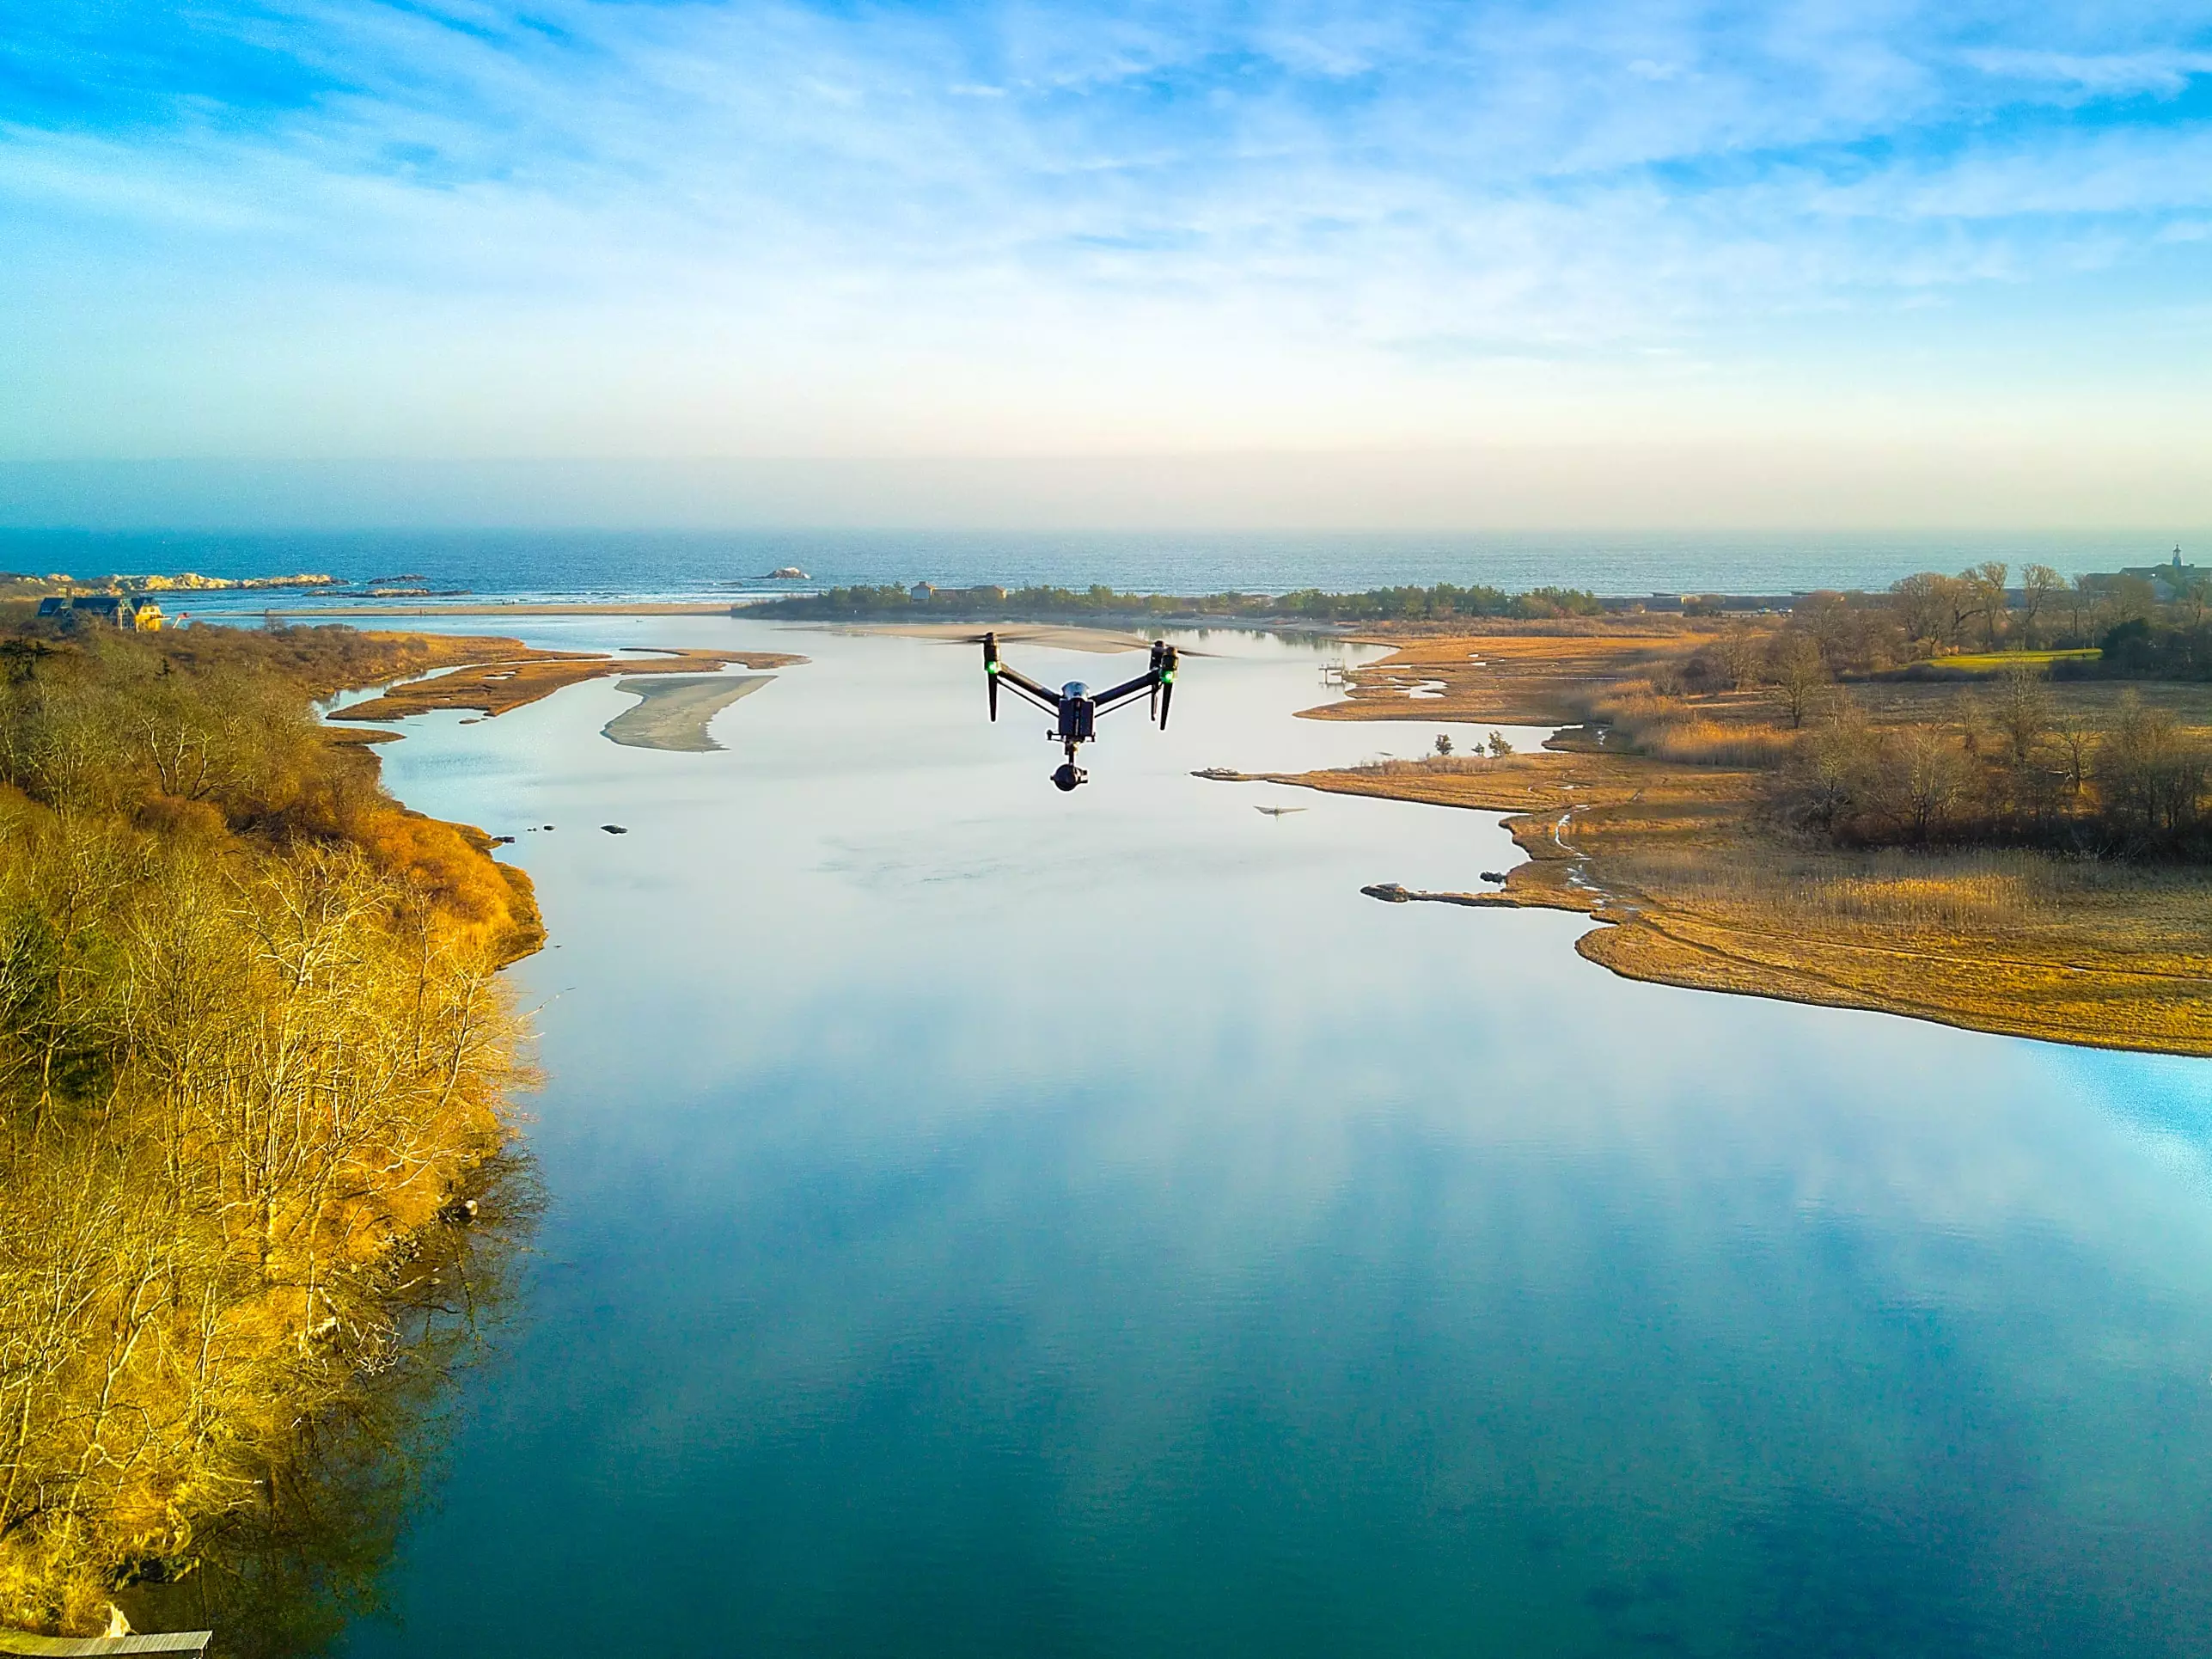 Drone flying over Narrow River in Narragansett RI, operated by Rhode Island licensed drone pilot, Sean McVeigh